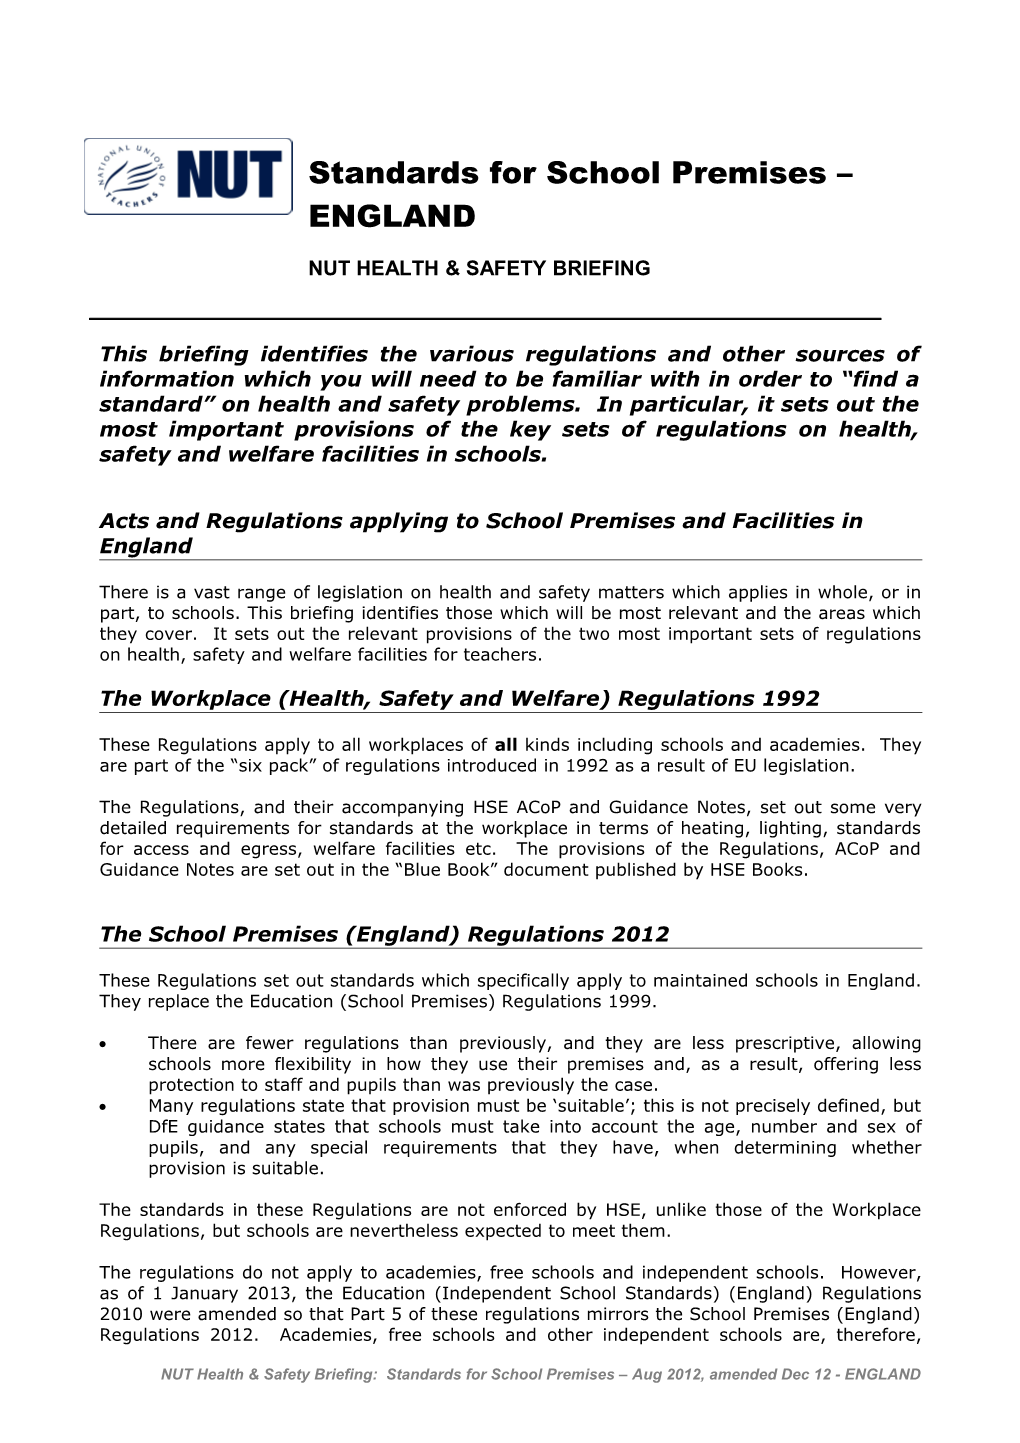 Acts and Regulations Applying to School Premises and Facilities in England